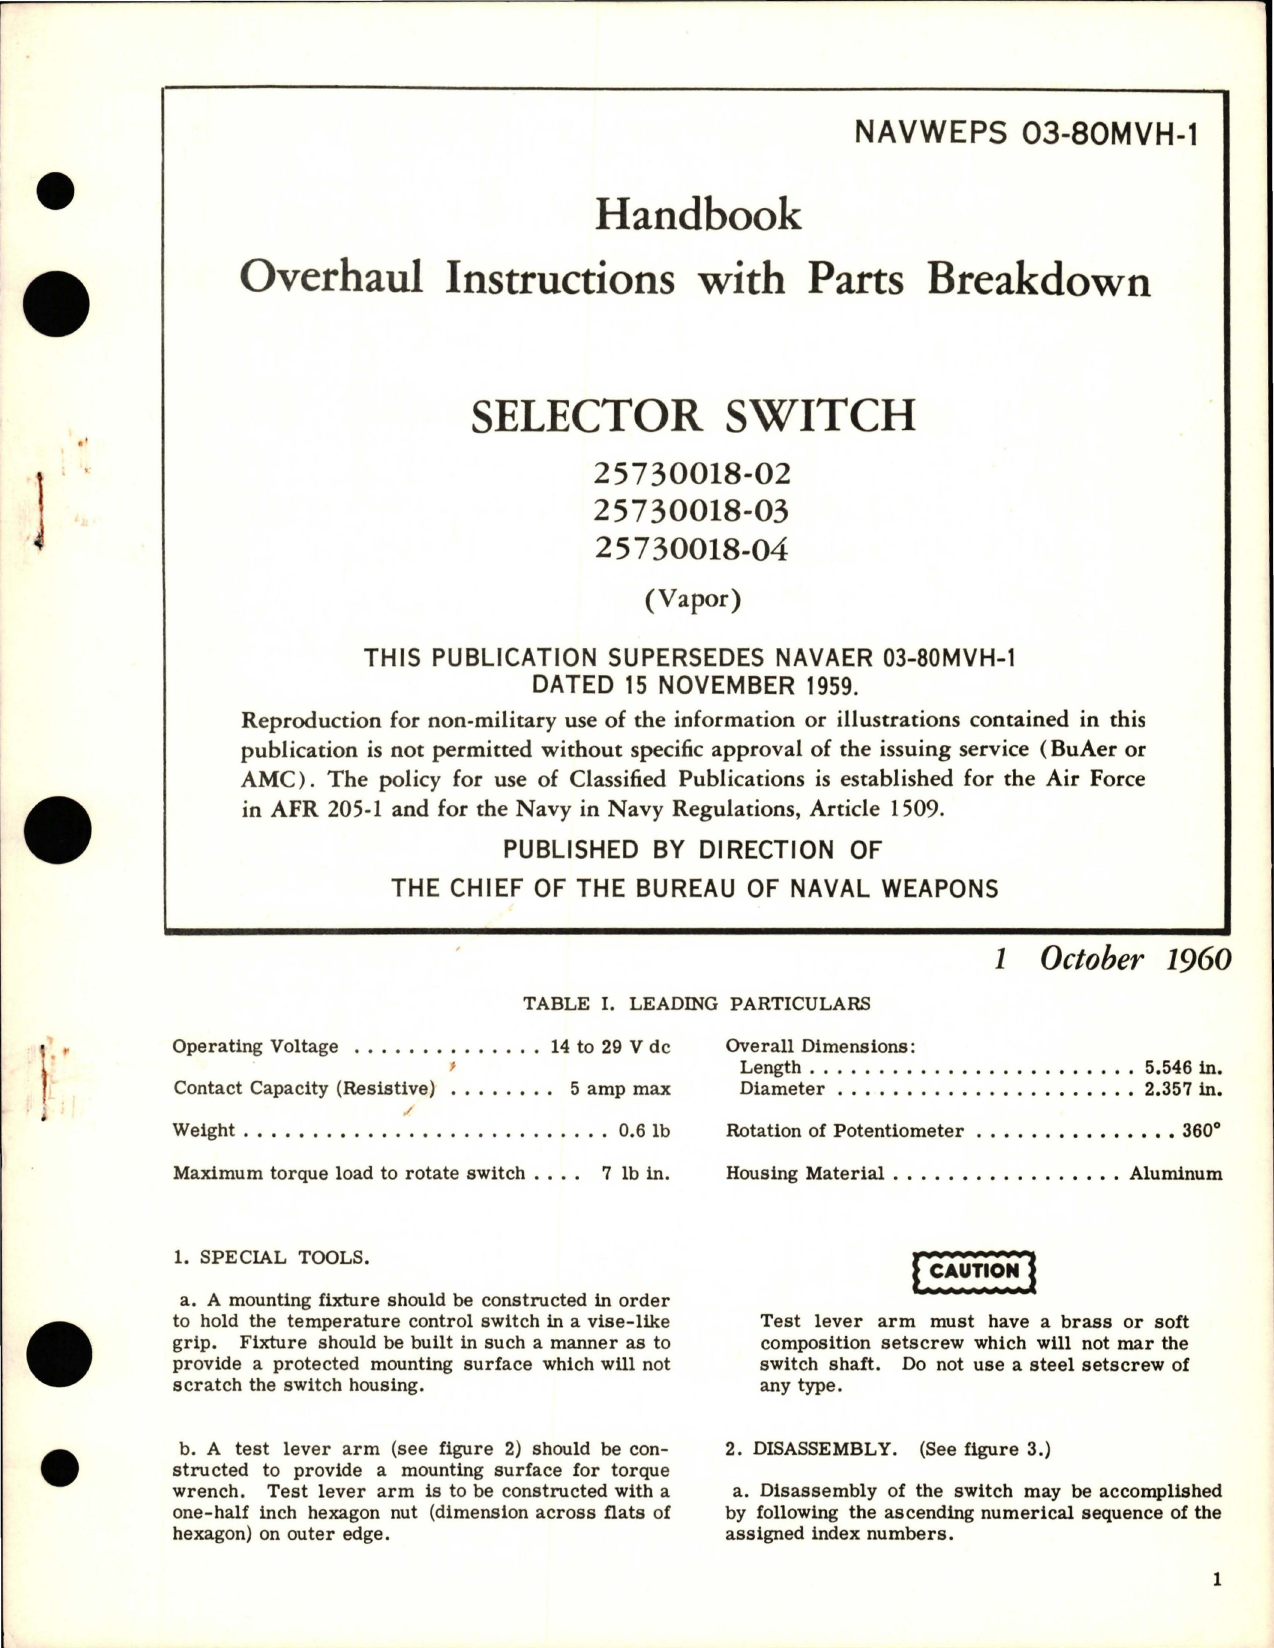 Sample page 1 from AirCorps Library document: Overhaul Instructions with Parts Breakdown for Selector Switch - Parts 25730018-02, 25730018-03, and 25730018-04